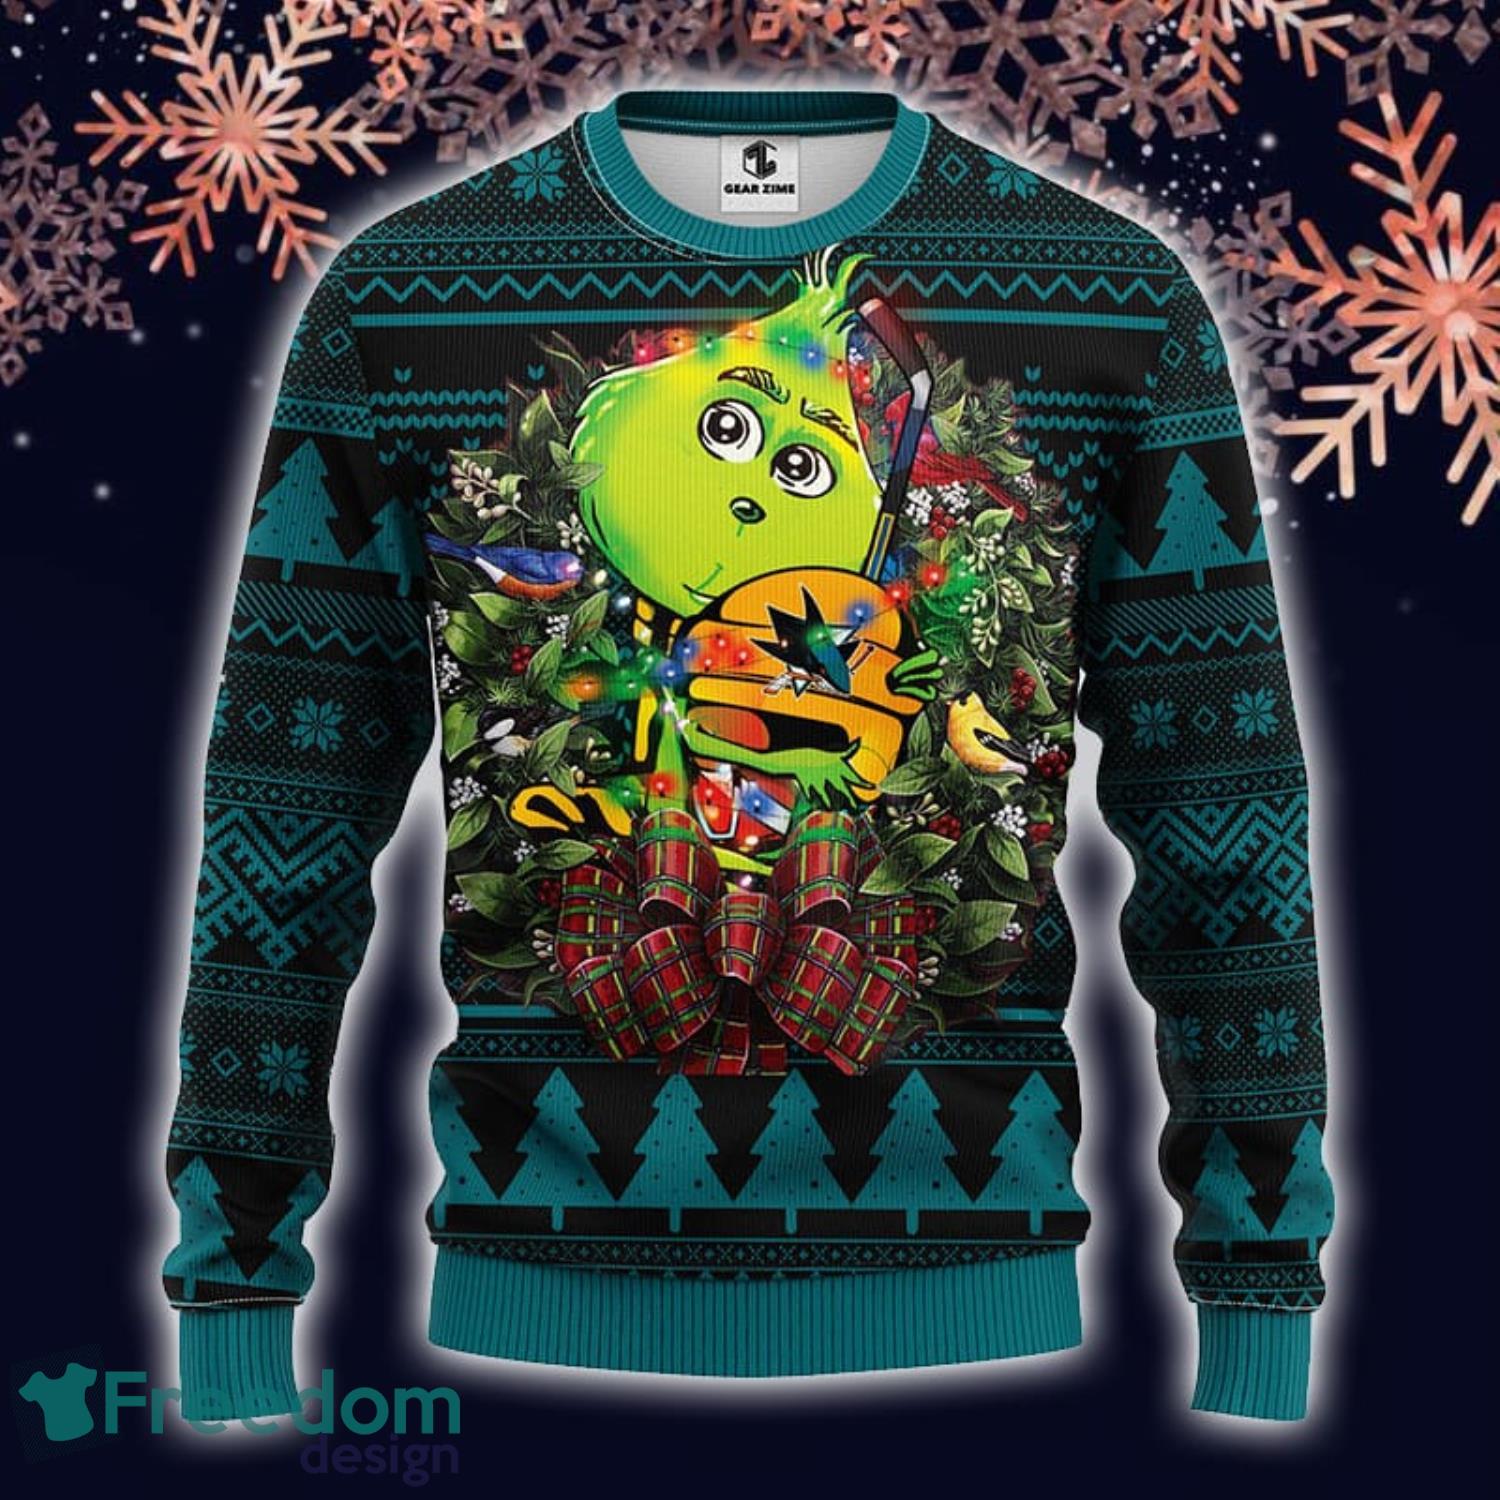 San Jose Sharks Grinch NHL Ugly Christmas Sweater - LIMITED EDITION